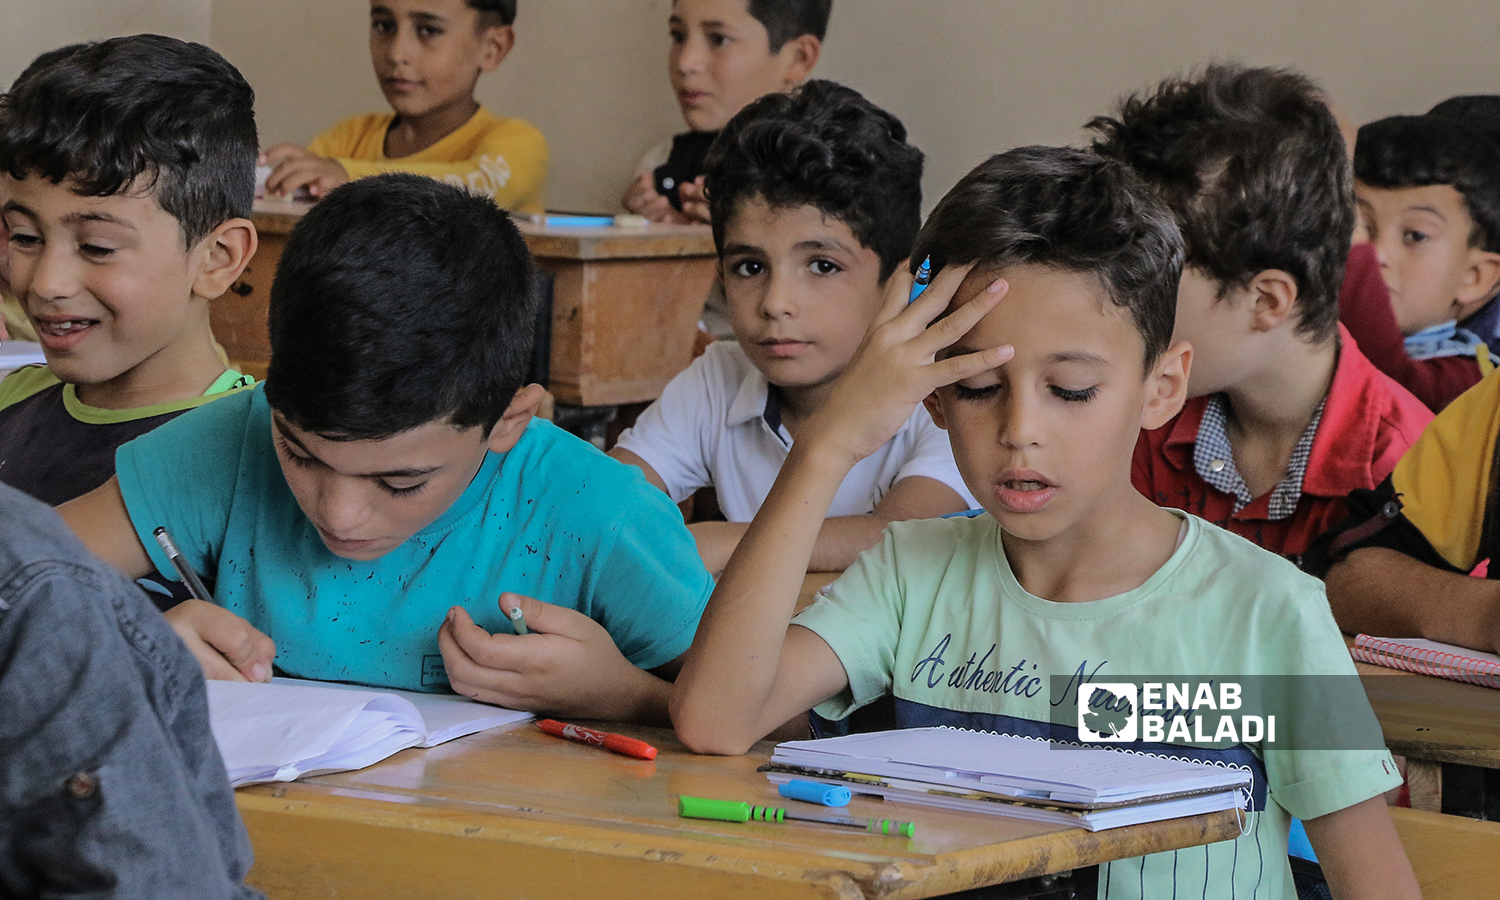 Primary school students sitting at desks in a classroom at the beginning of the new school year in the northern countryside of Aleppo - Azaz city - 22 September 2021 (Enab Baladi / Walid Othman)